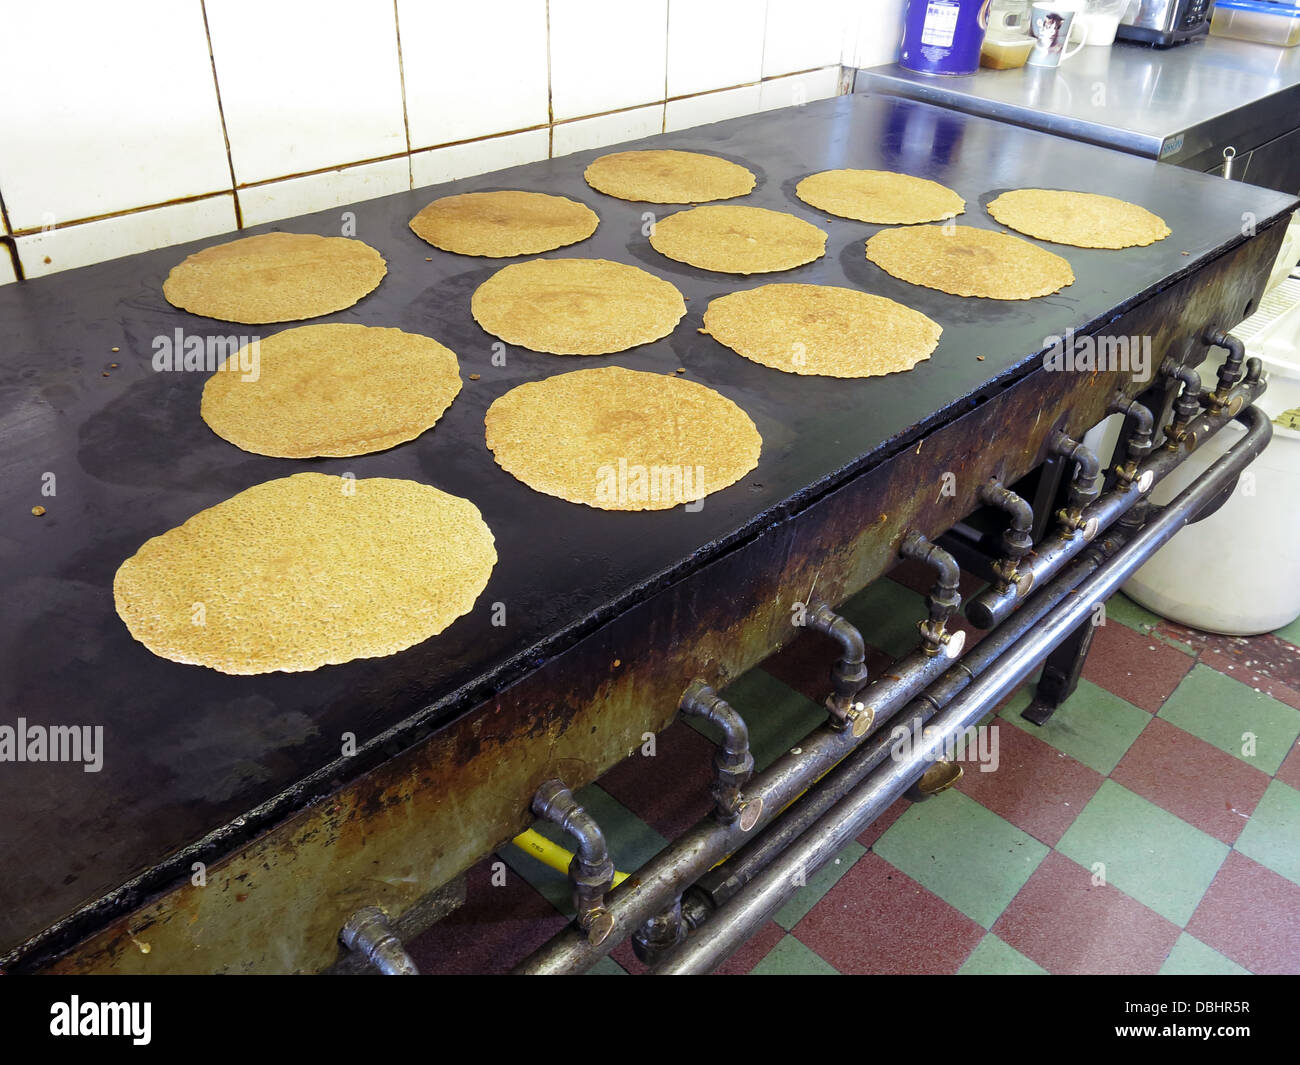 Interior of a traditional Stoke / Staffordshire Oatcake shop, with bright yellow frontage, cooking on an iron griddle 'baxton' Stock Photo